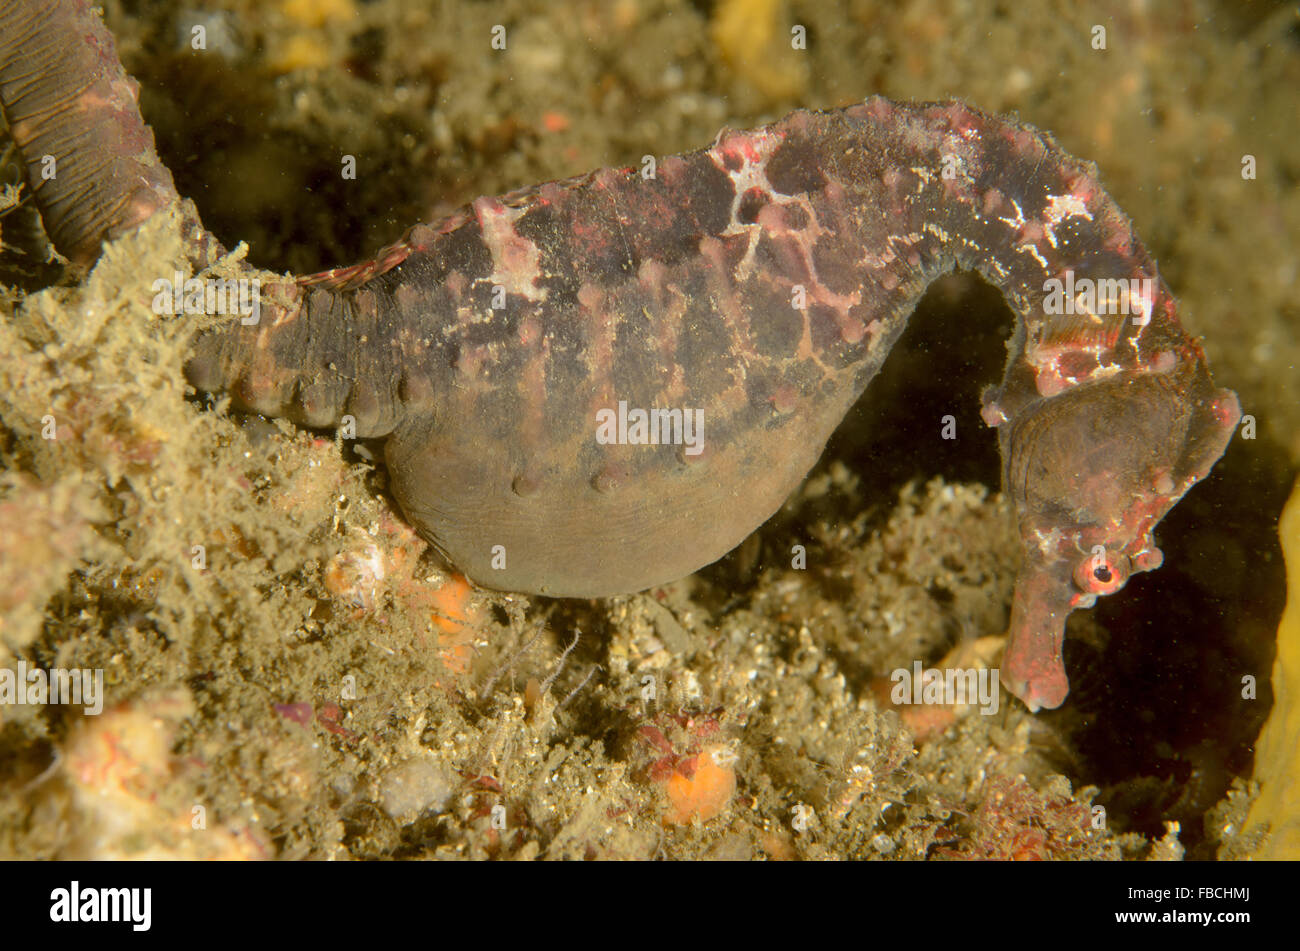 Female pot-bellied seahorse, Hippocampus abdominalis, at Kurnell, New South Wales, Australia. Stock Photo